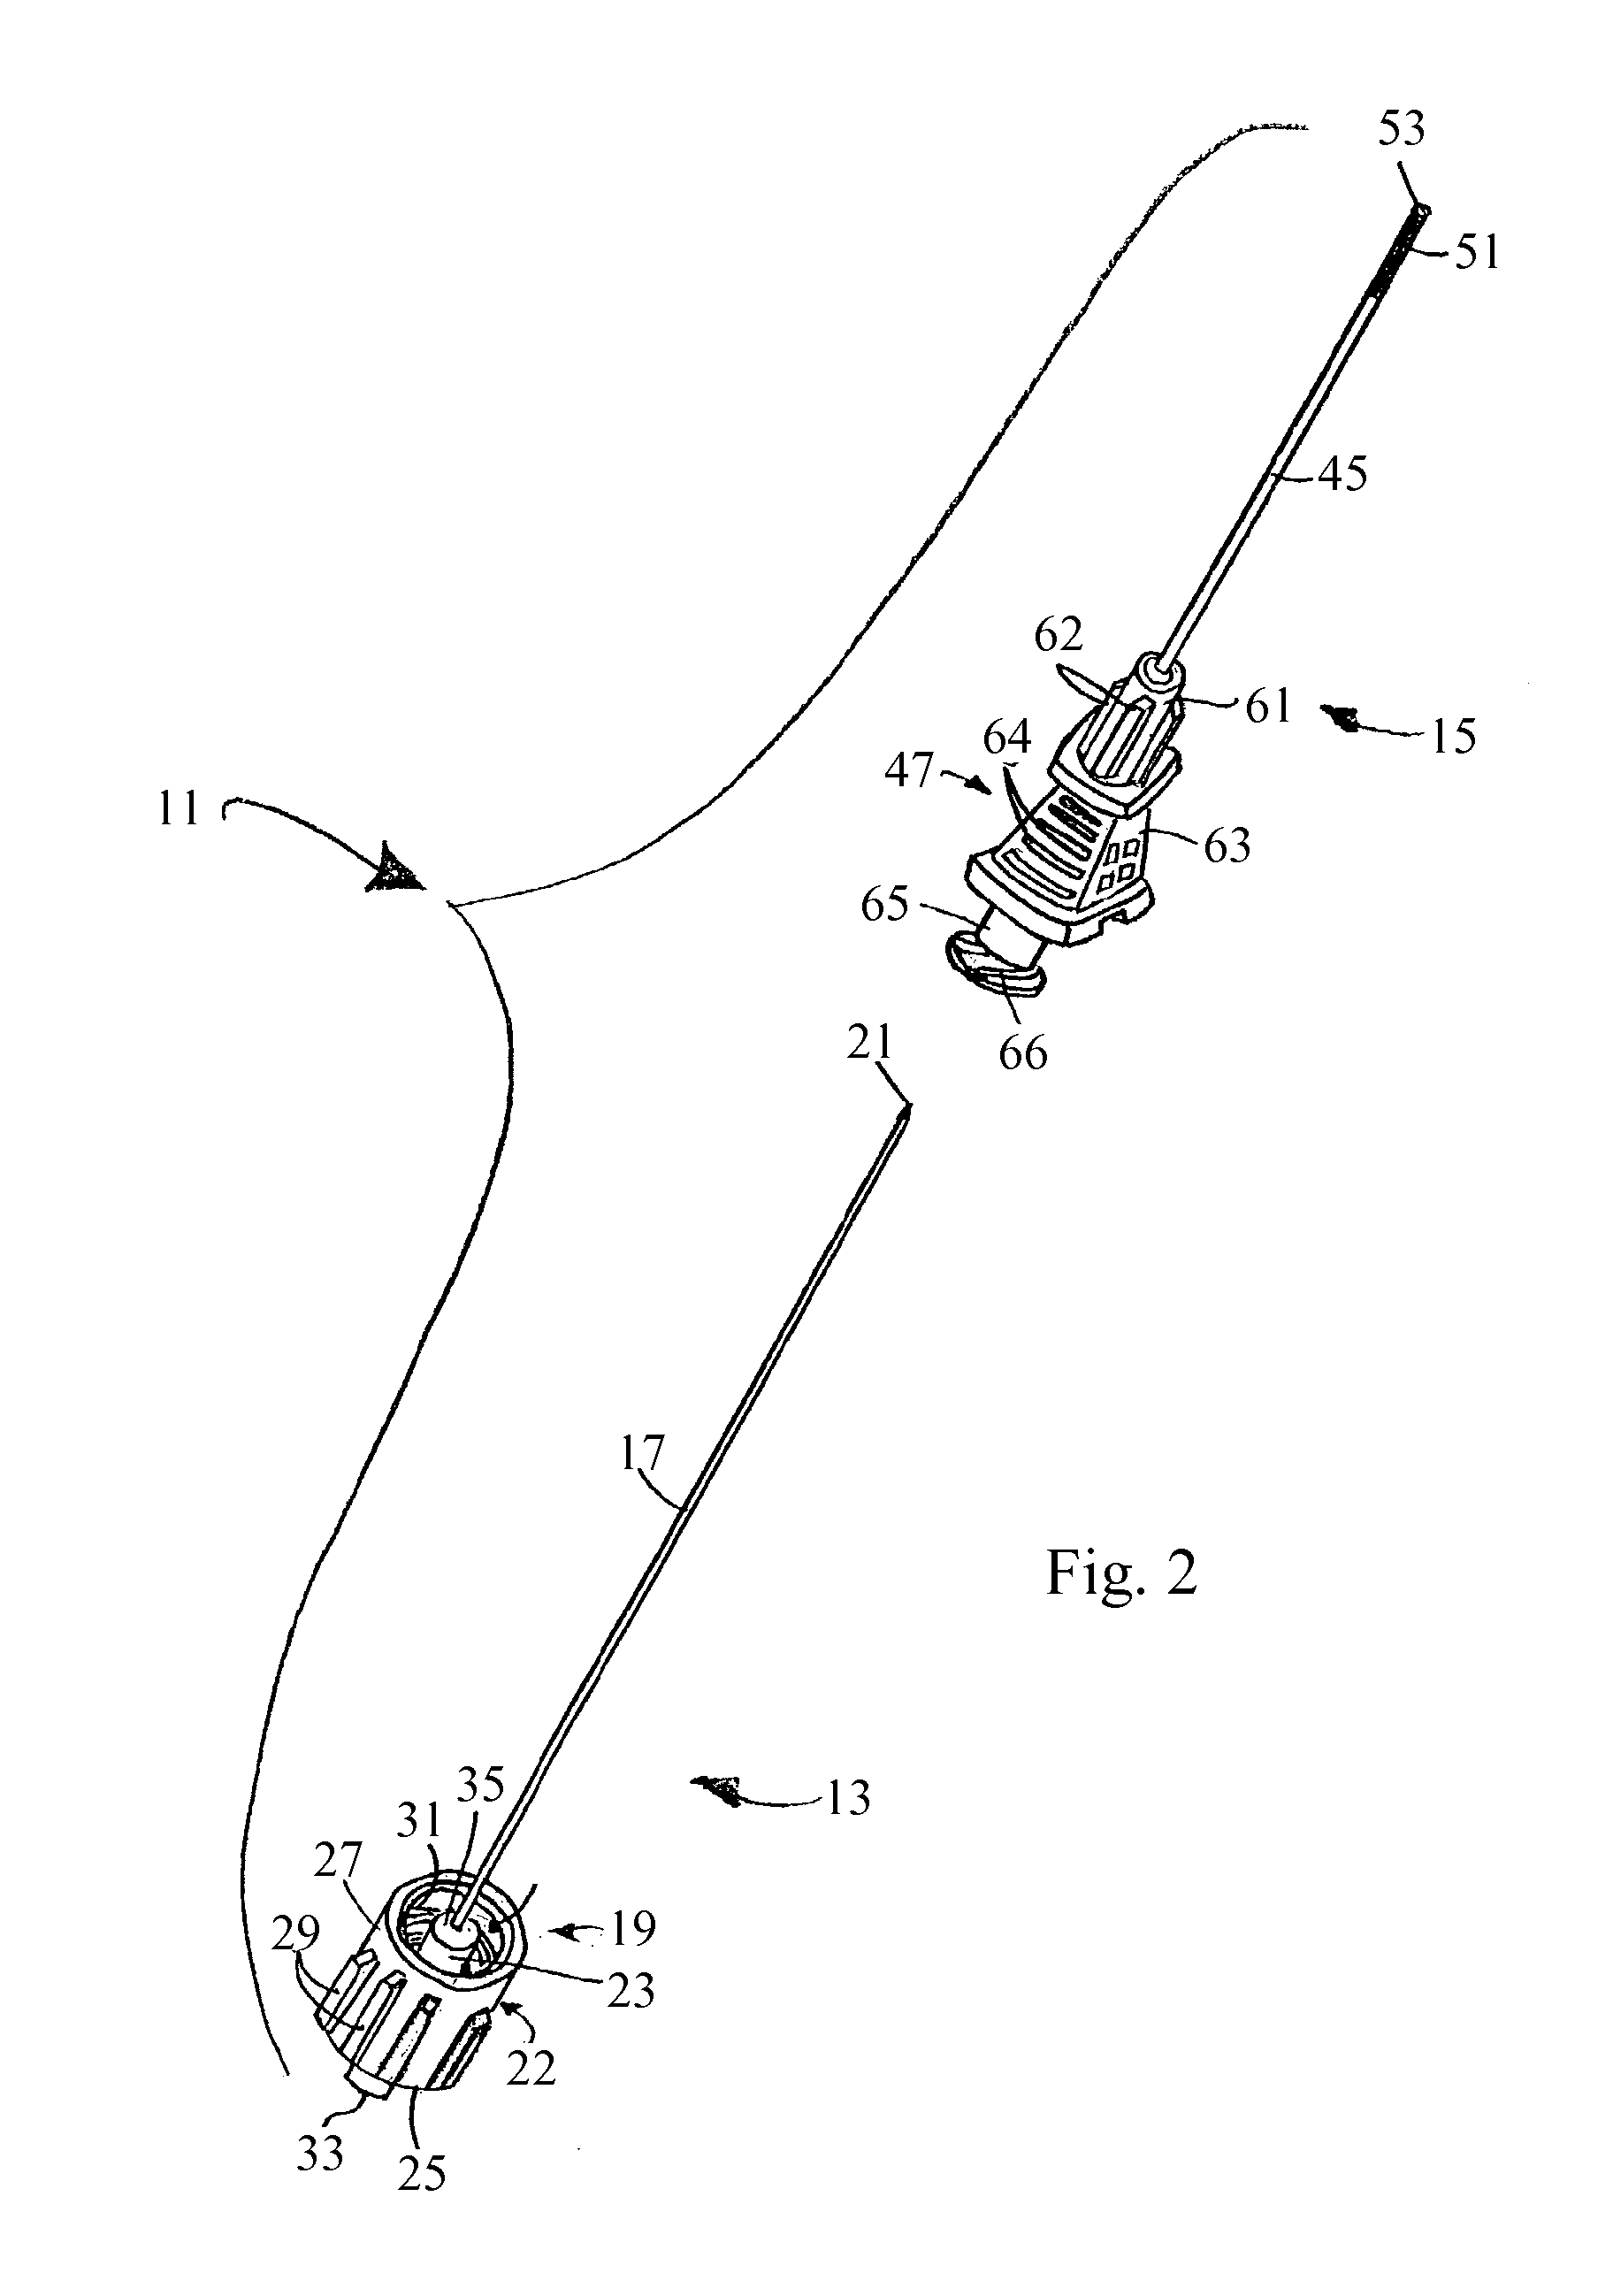 Method for implanting a percutaneous endoscopic gastrostomy/jejunostomy tube in a patient and access needle for use in said method